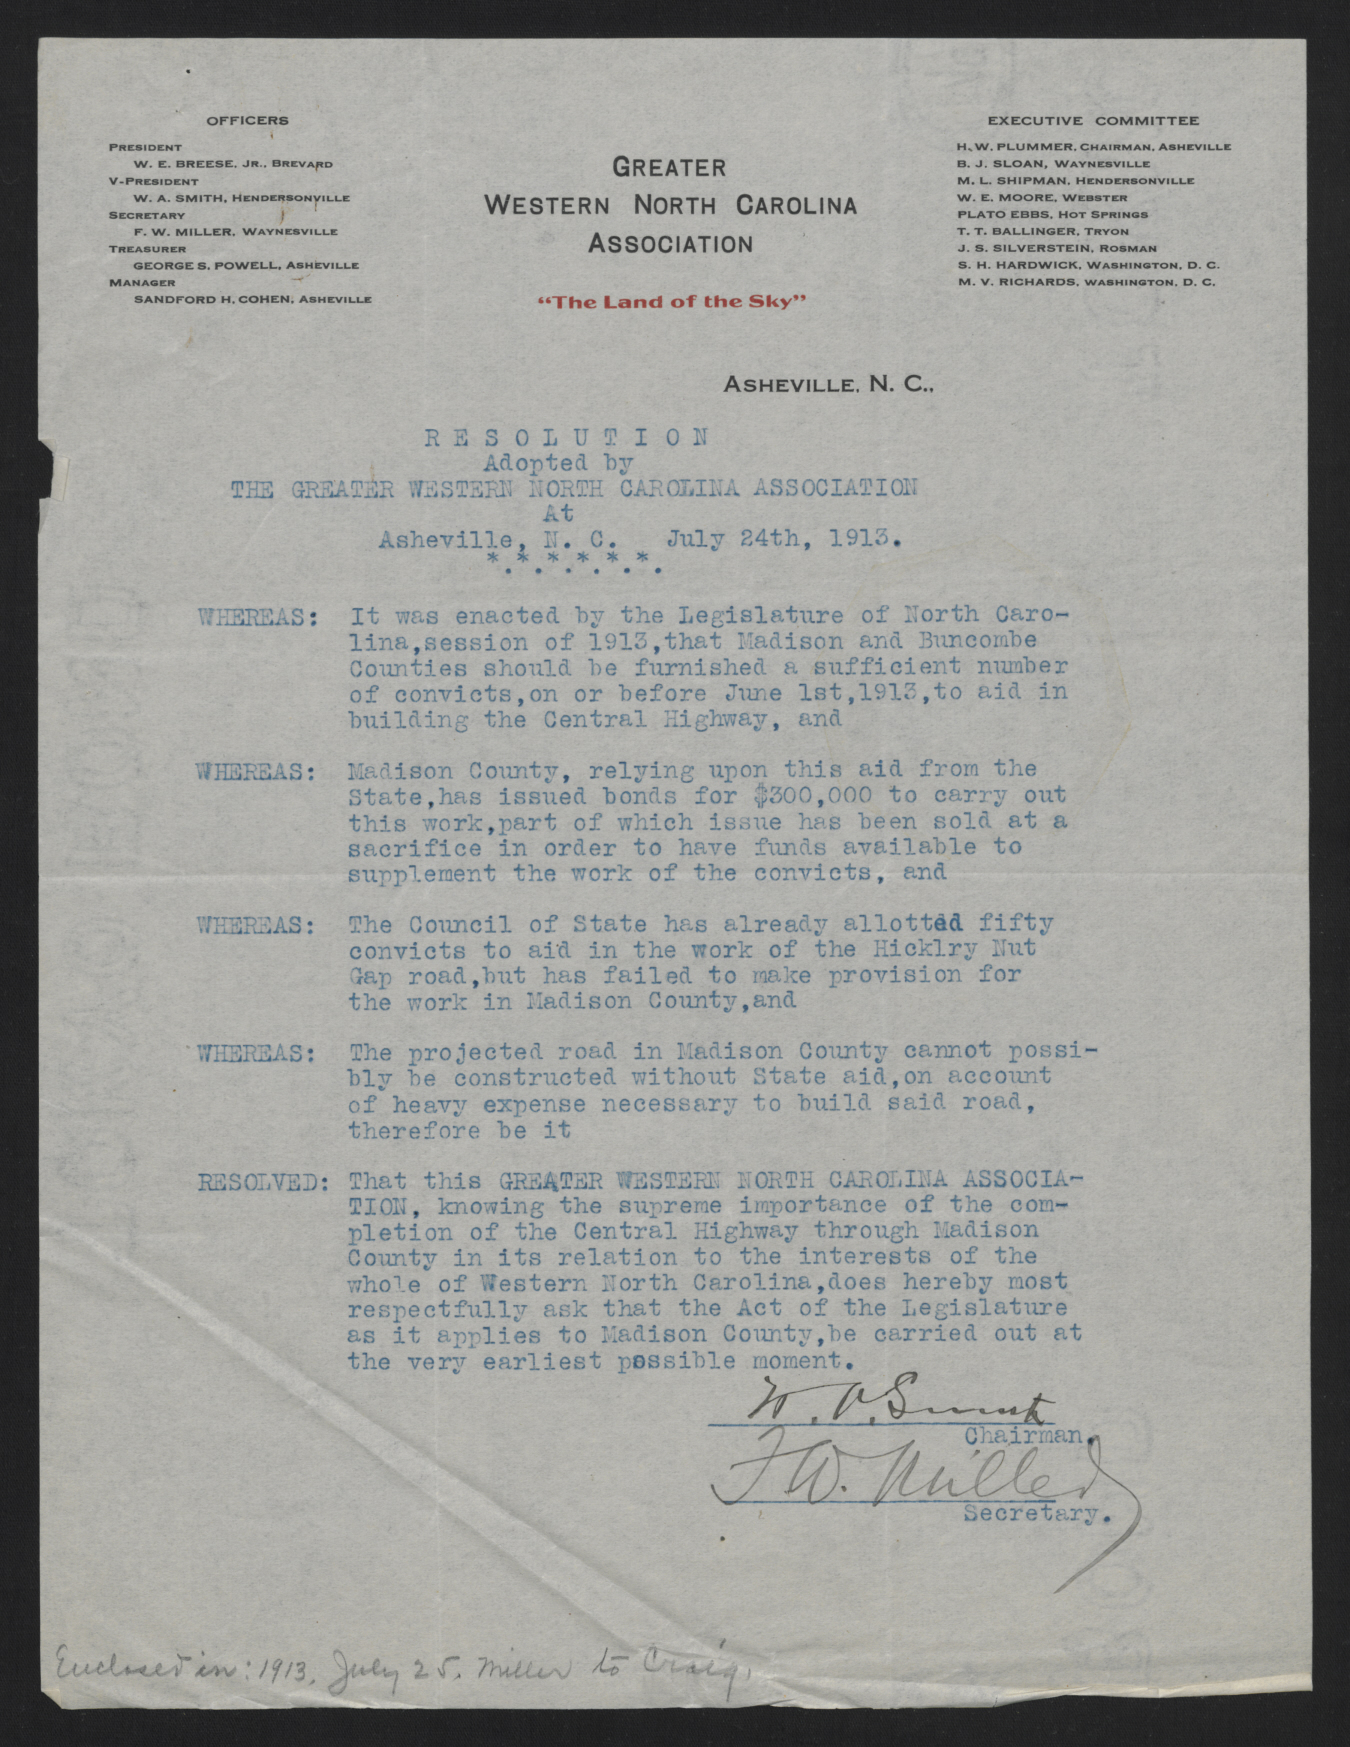 Resolution of the Greater Western North Carolina Association, July 24, 1913